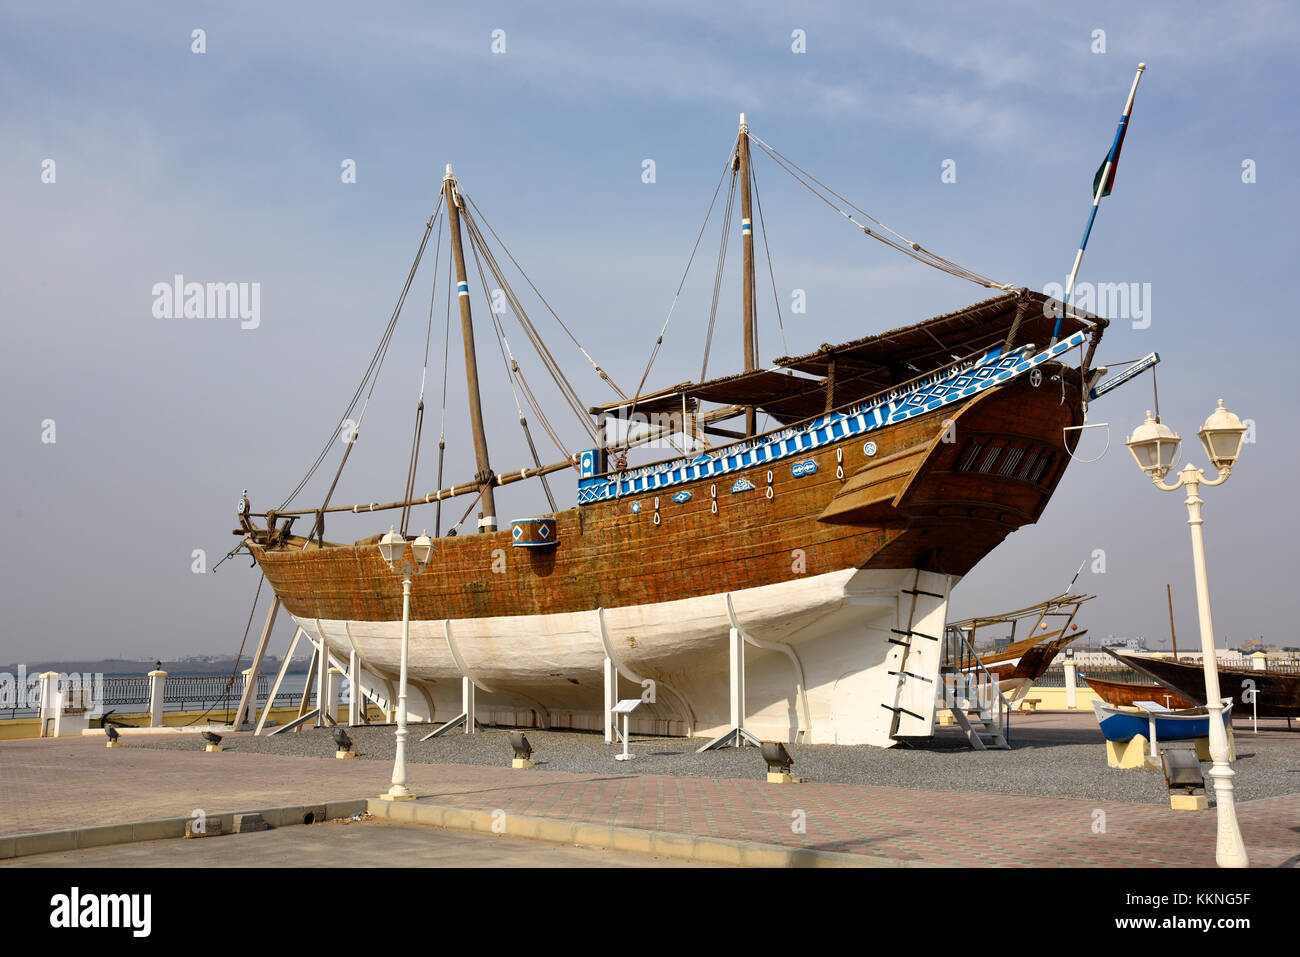 Oman Sur  A dhow or traditional sailing vessel Stock Photo